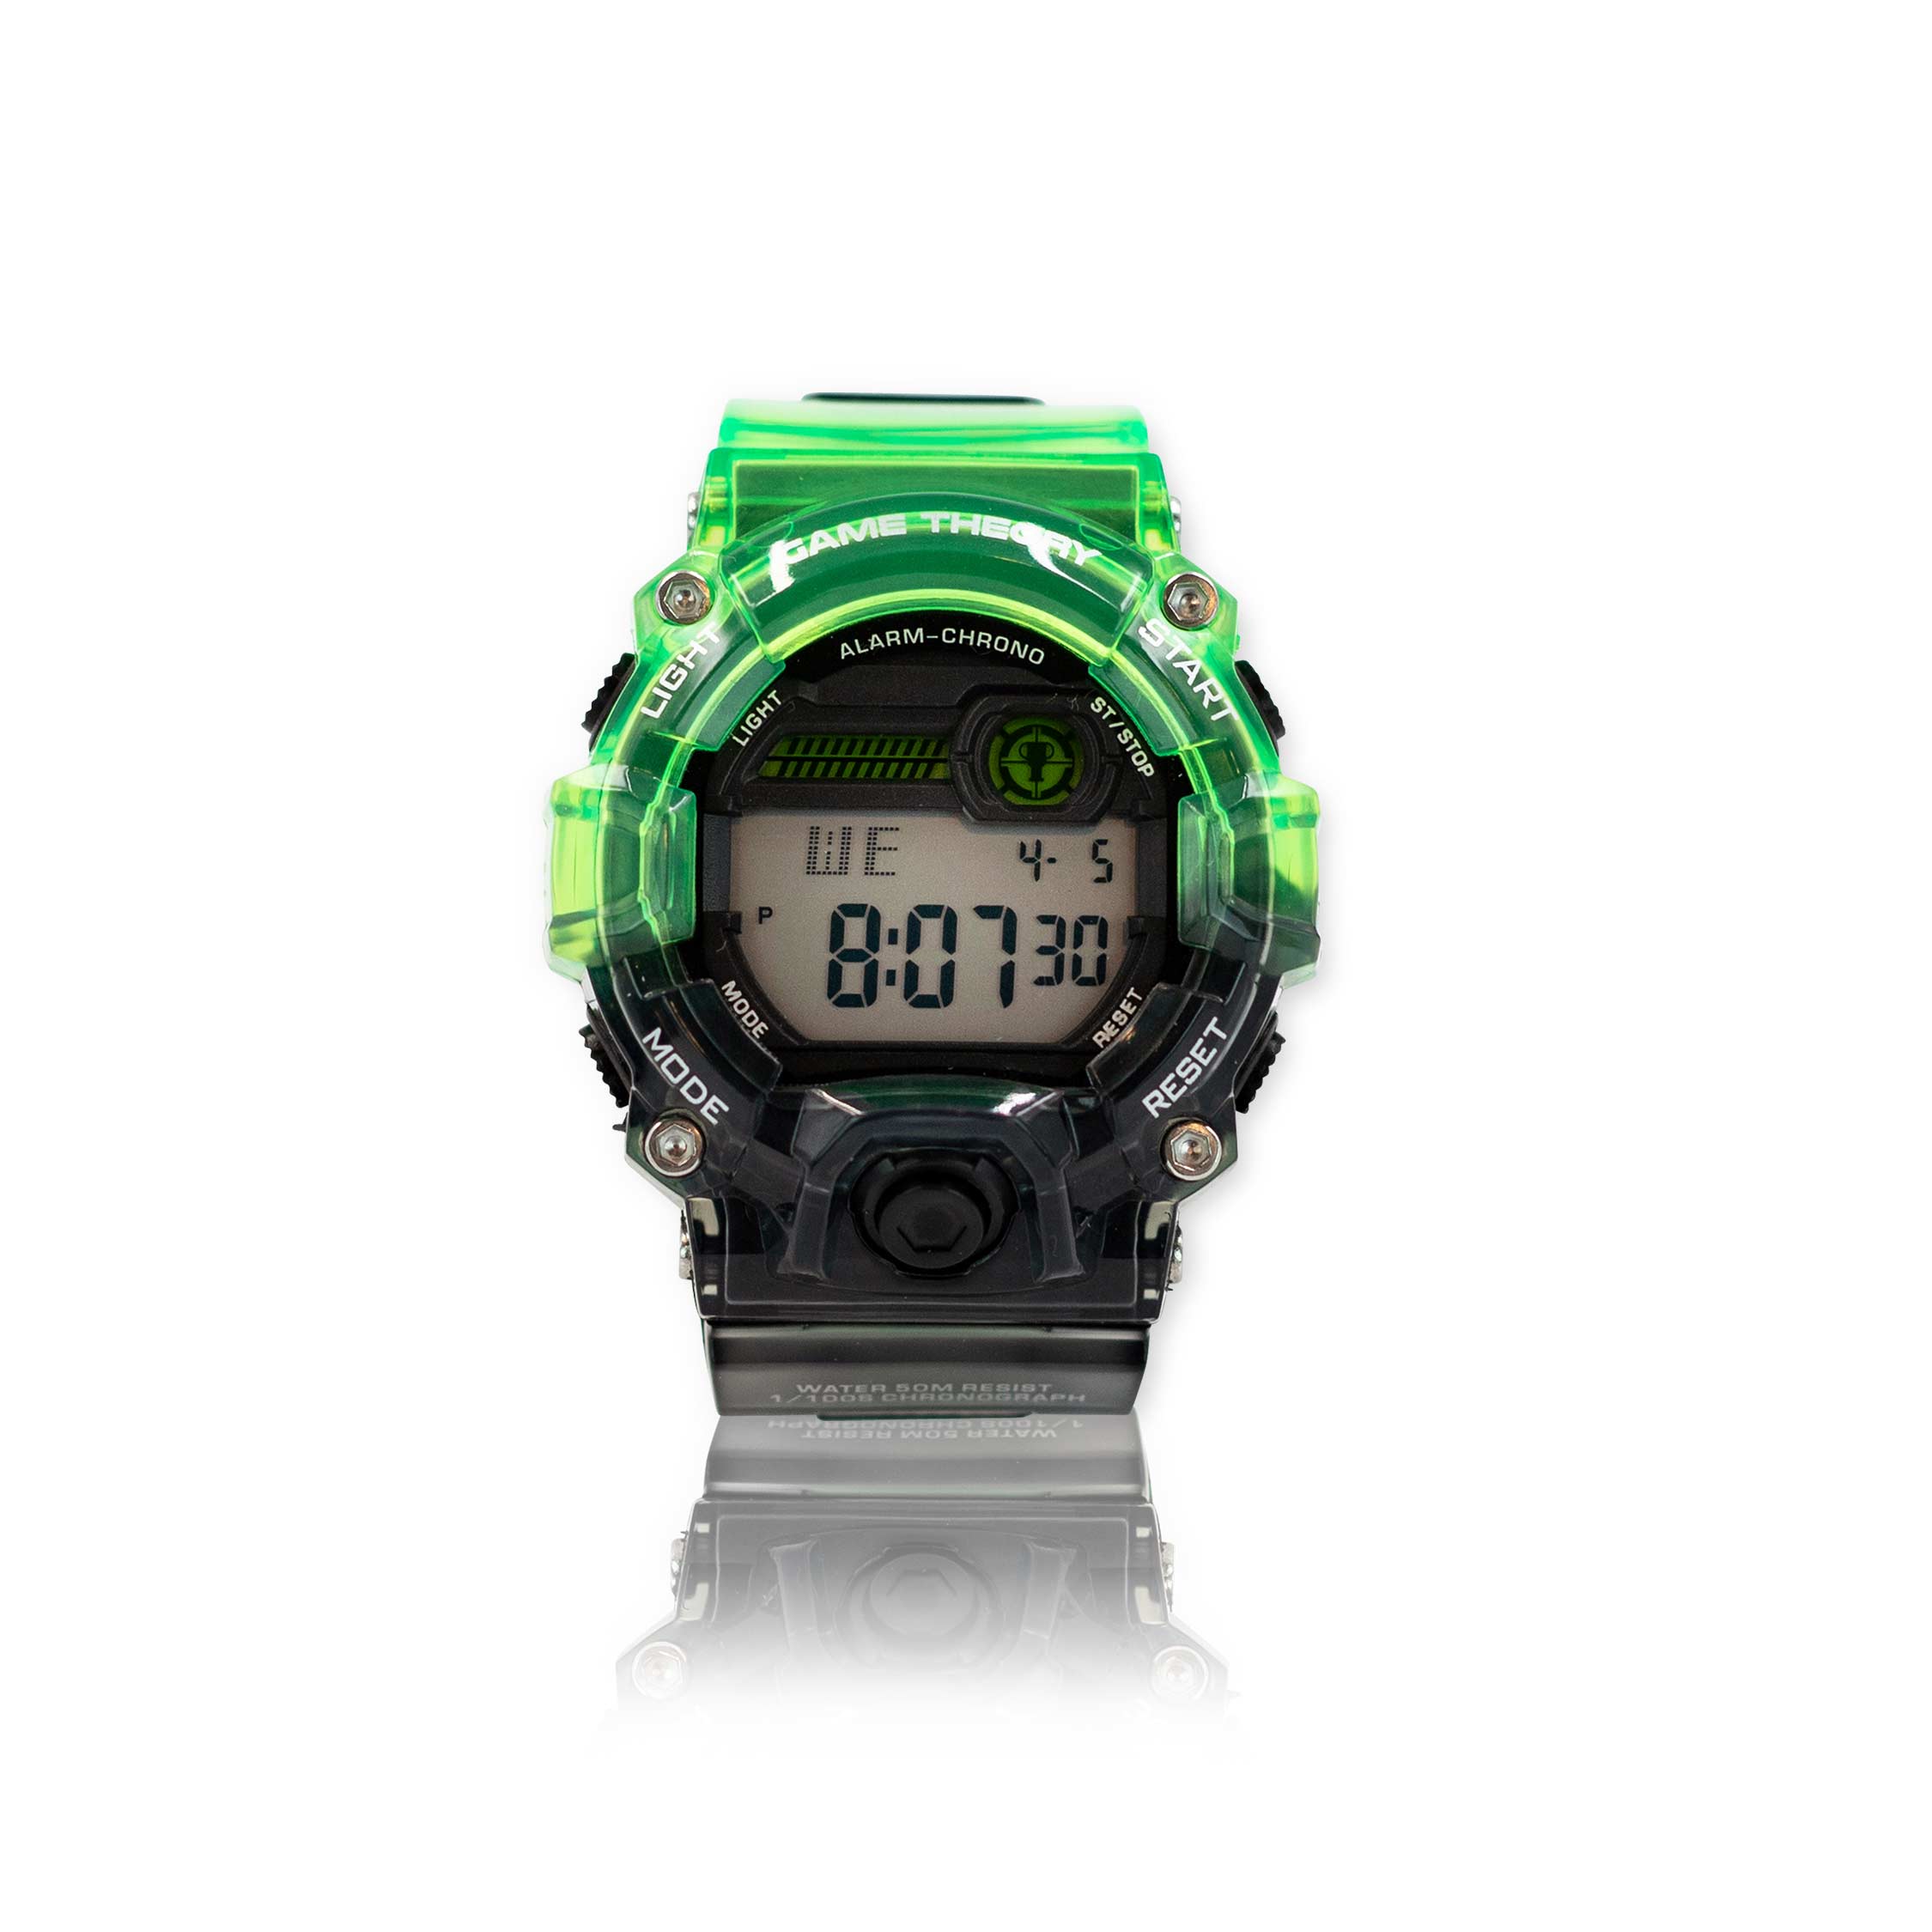 It's TIME for a Theory! Game Theory Digital Watch GT2909 Default Title Official Game Theory Merch